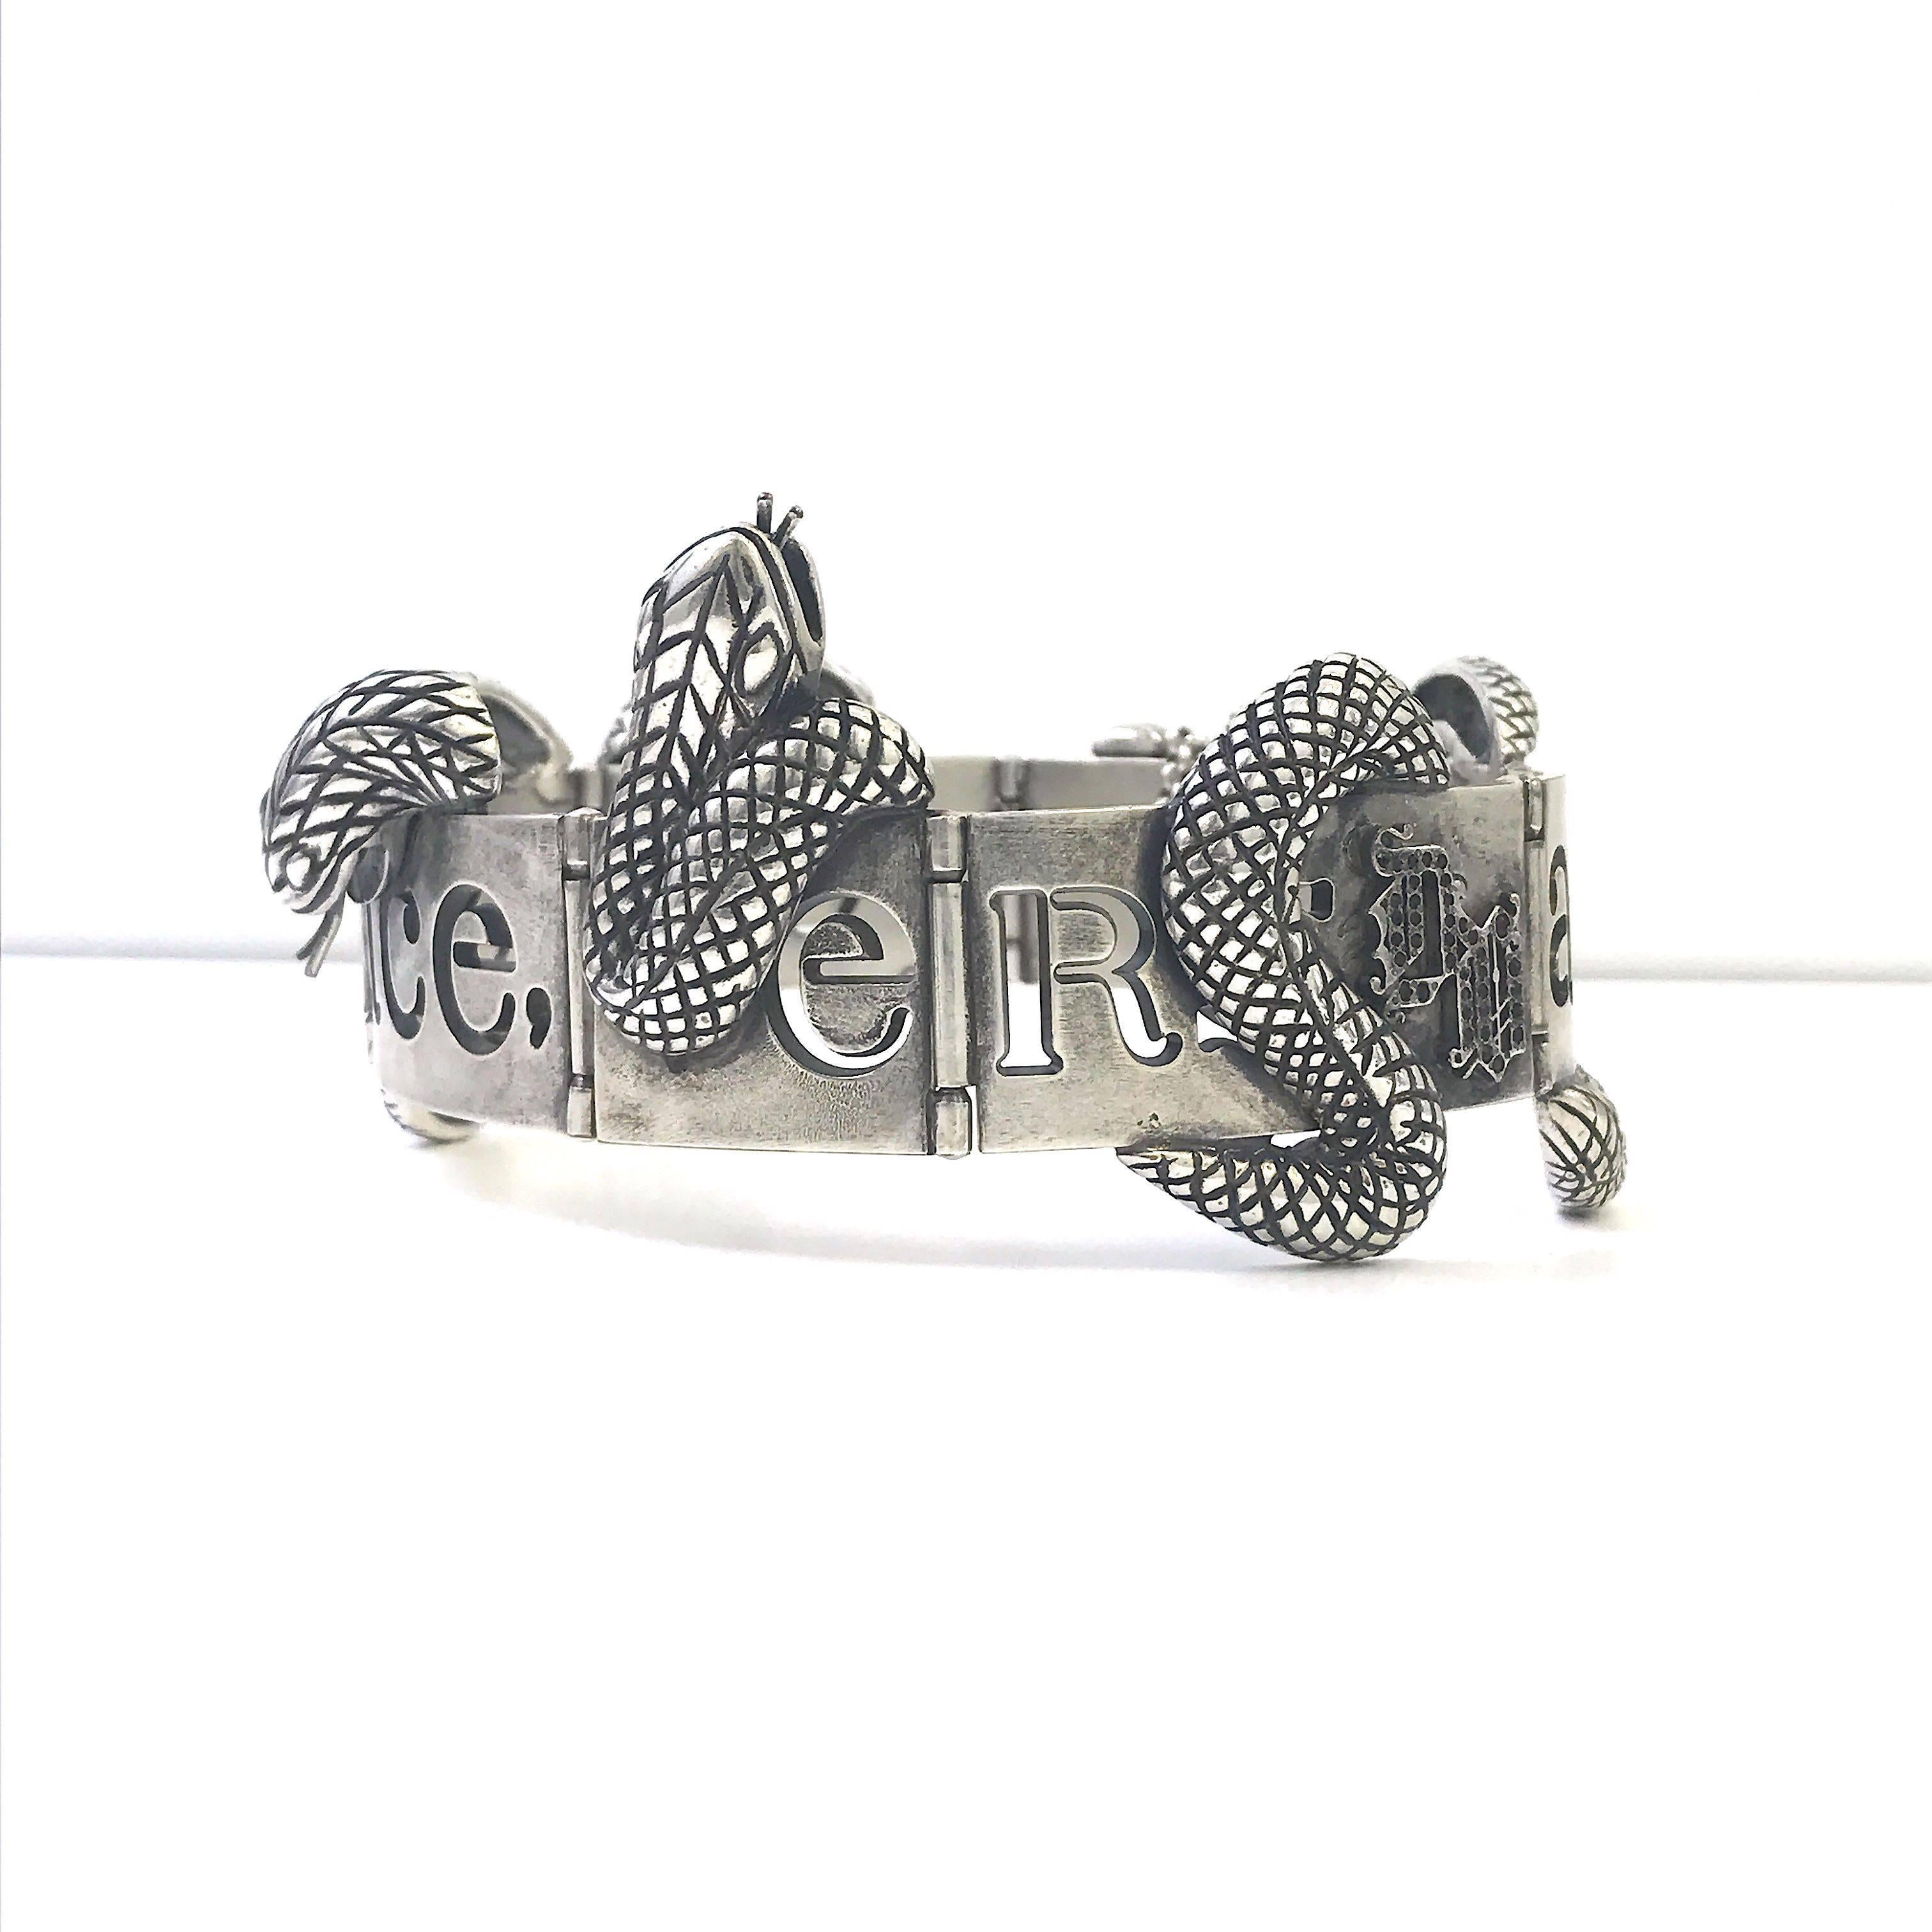 This Gianni Versace snake choker is a masterpiece. Part of the designers gothic movement the item is beautifully hand-crafted from a distressed silver tone metal. The main statement of this spectacular piece are the two metal snakes intwined around